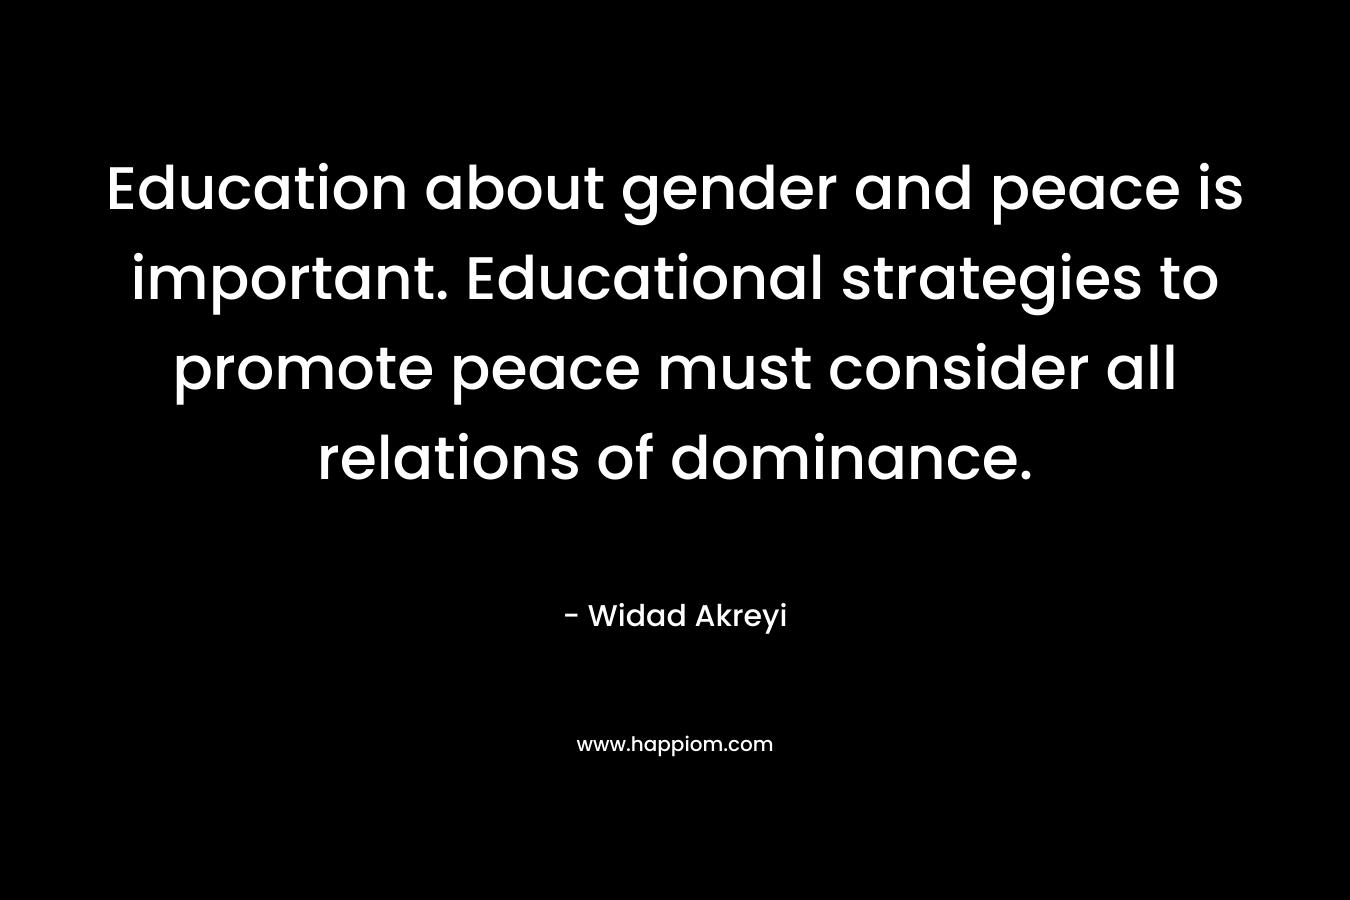 Education about gender and peace is important. Educational strategies to promote peace must consider all relations of dominance. – Widad Akreyi